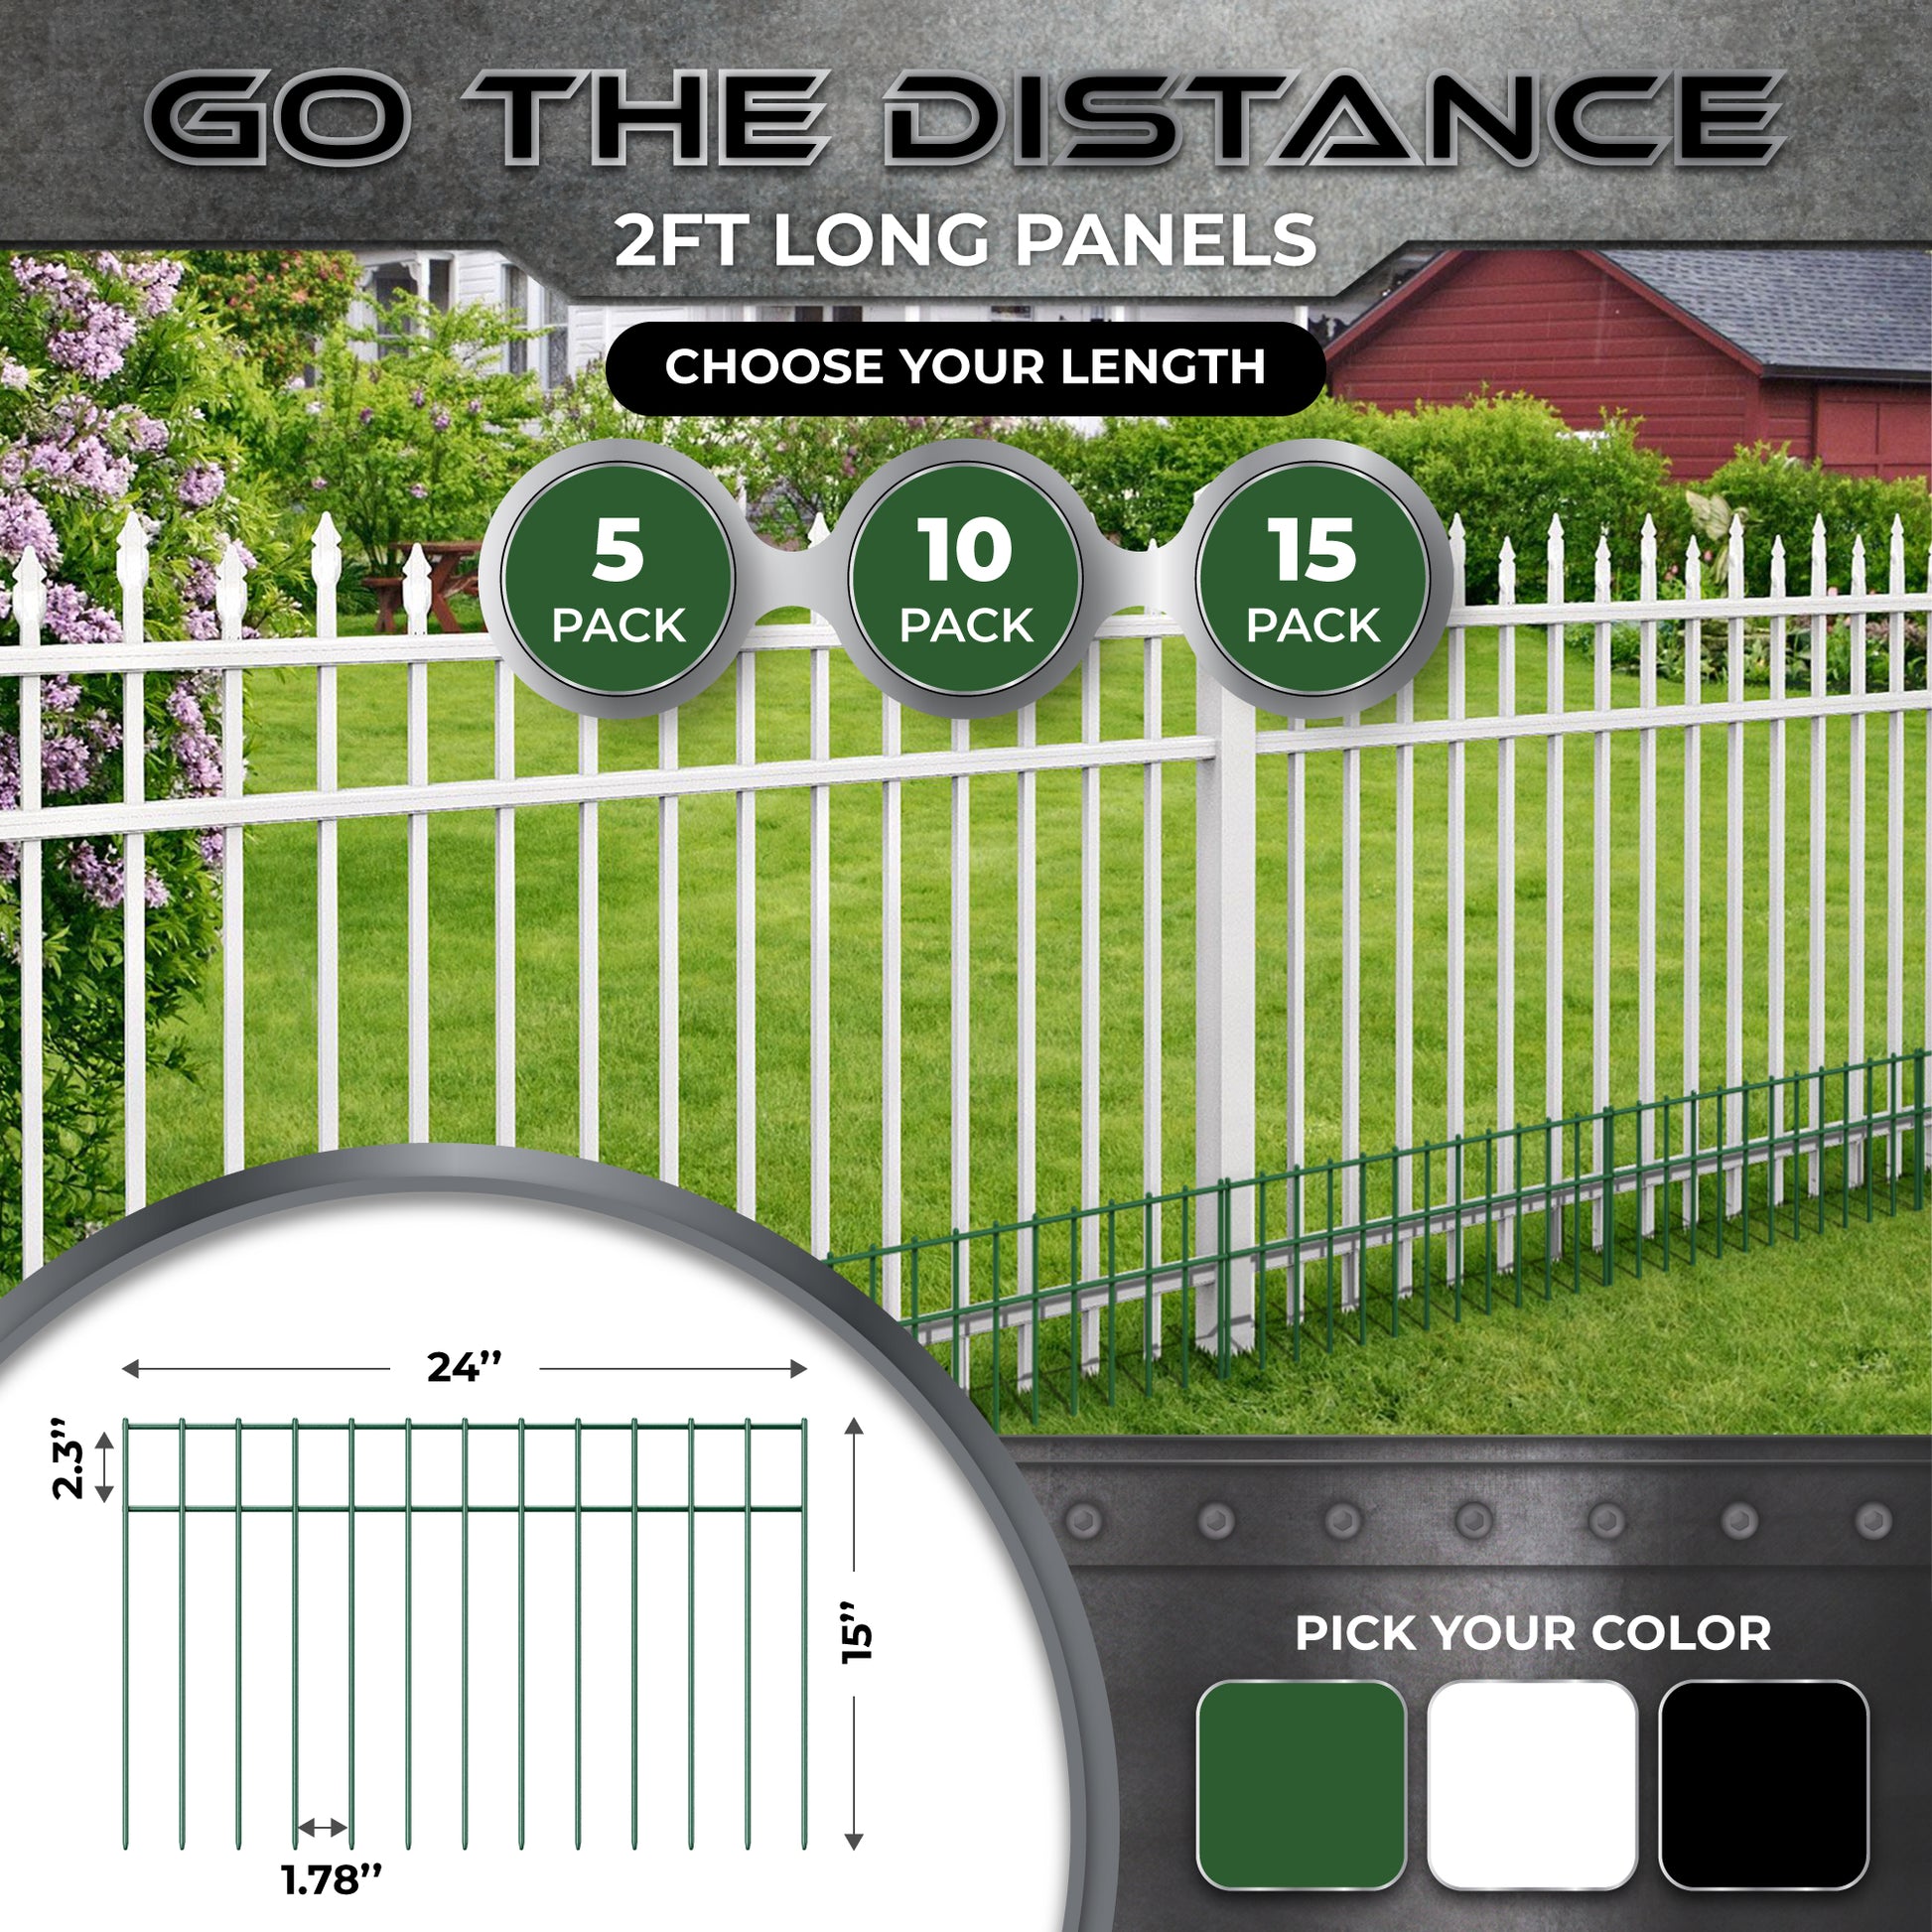 Towallmark 15 Pack Animal Barrier Fence, 24x15in No Dig Fence Underground  Decorative Garden Fencing, Dog Rabbits Fences Metal Fences Panel Ground